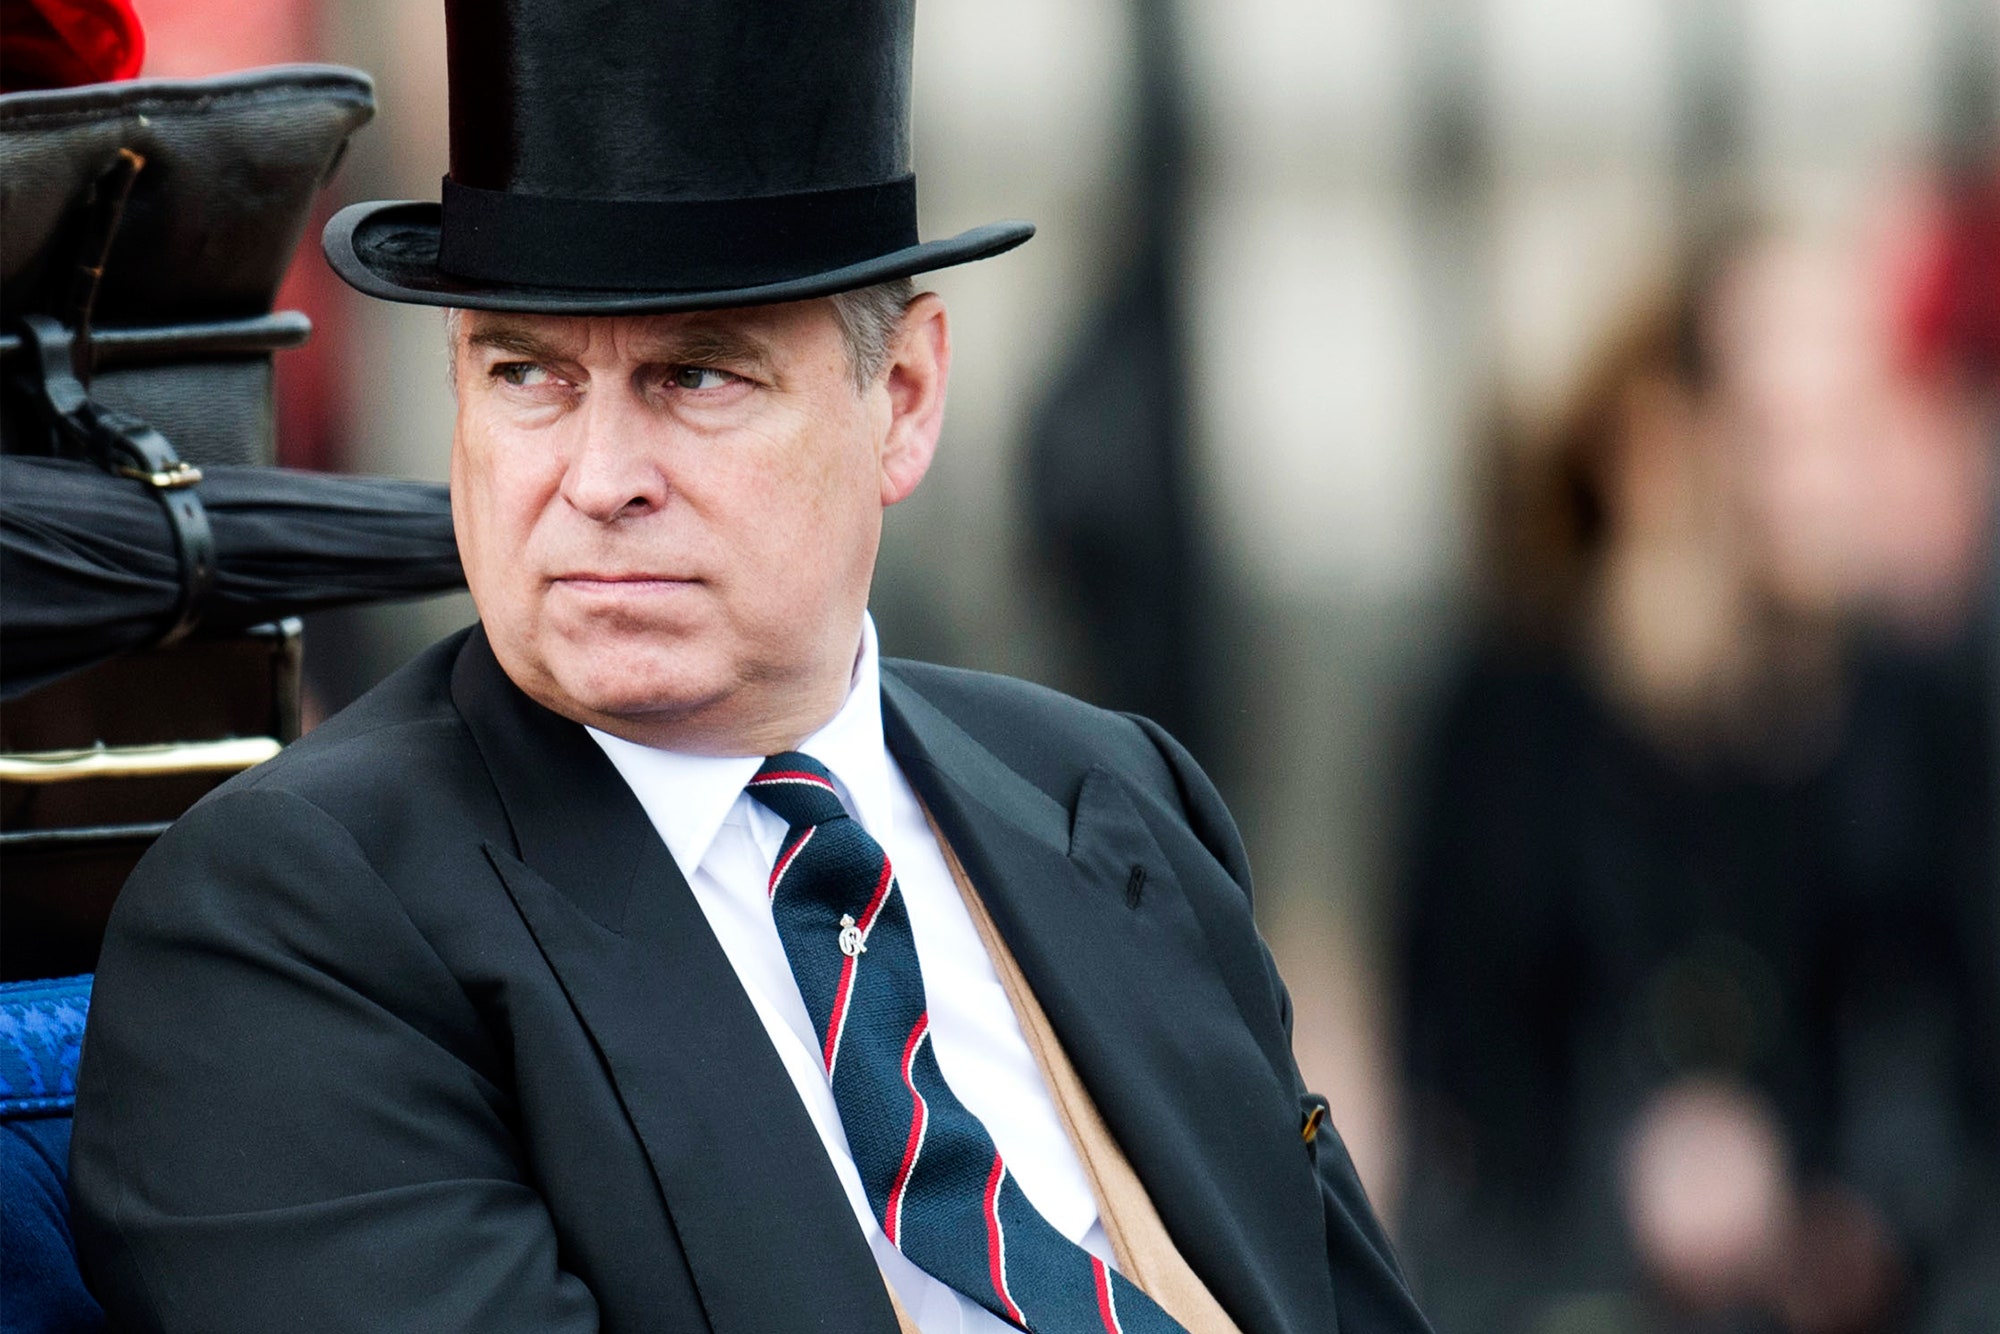 The Royal Scandal Surrounding Prince Andrew: Uncovering The Real Story